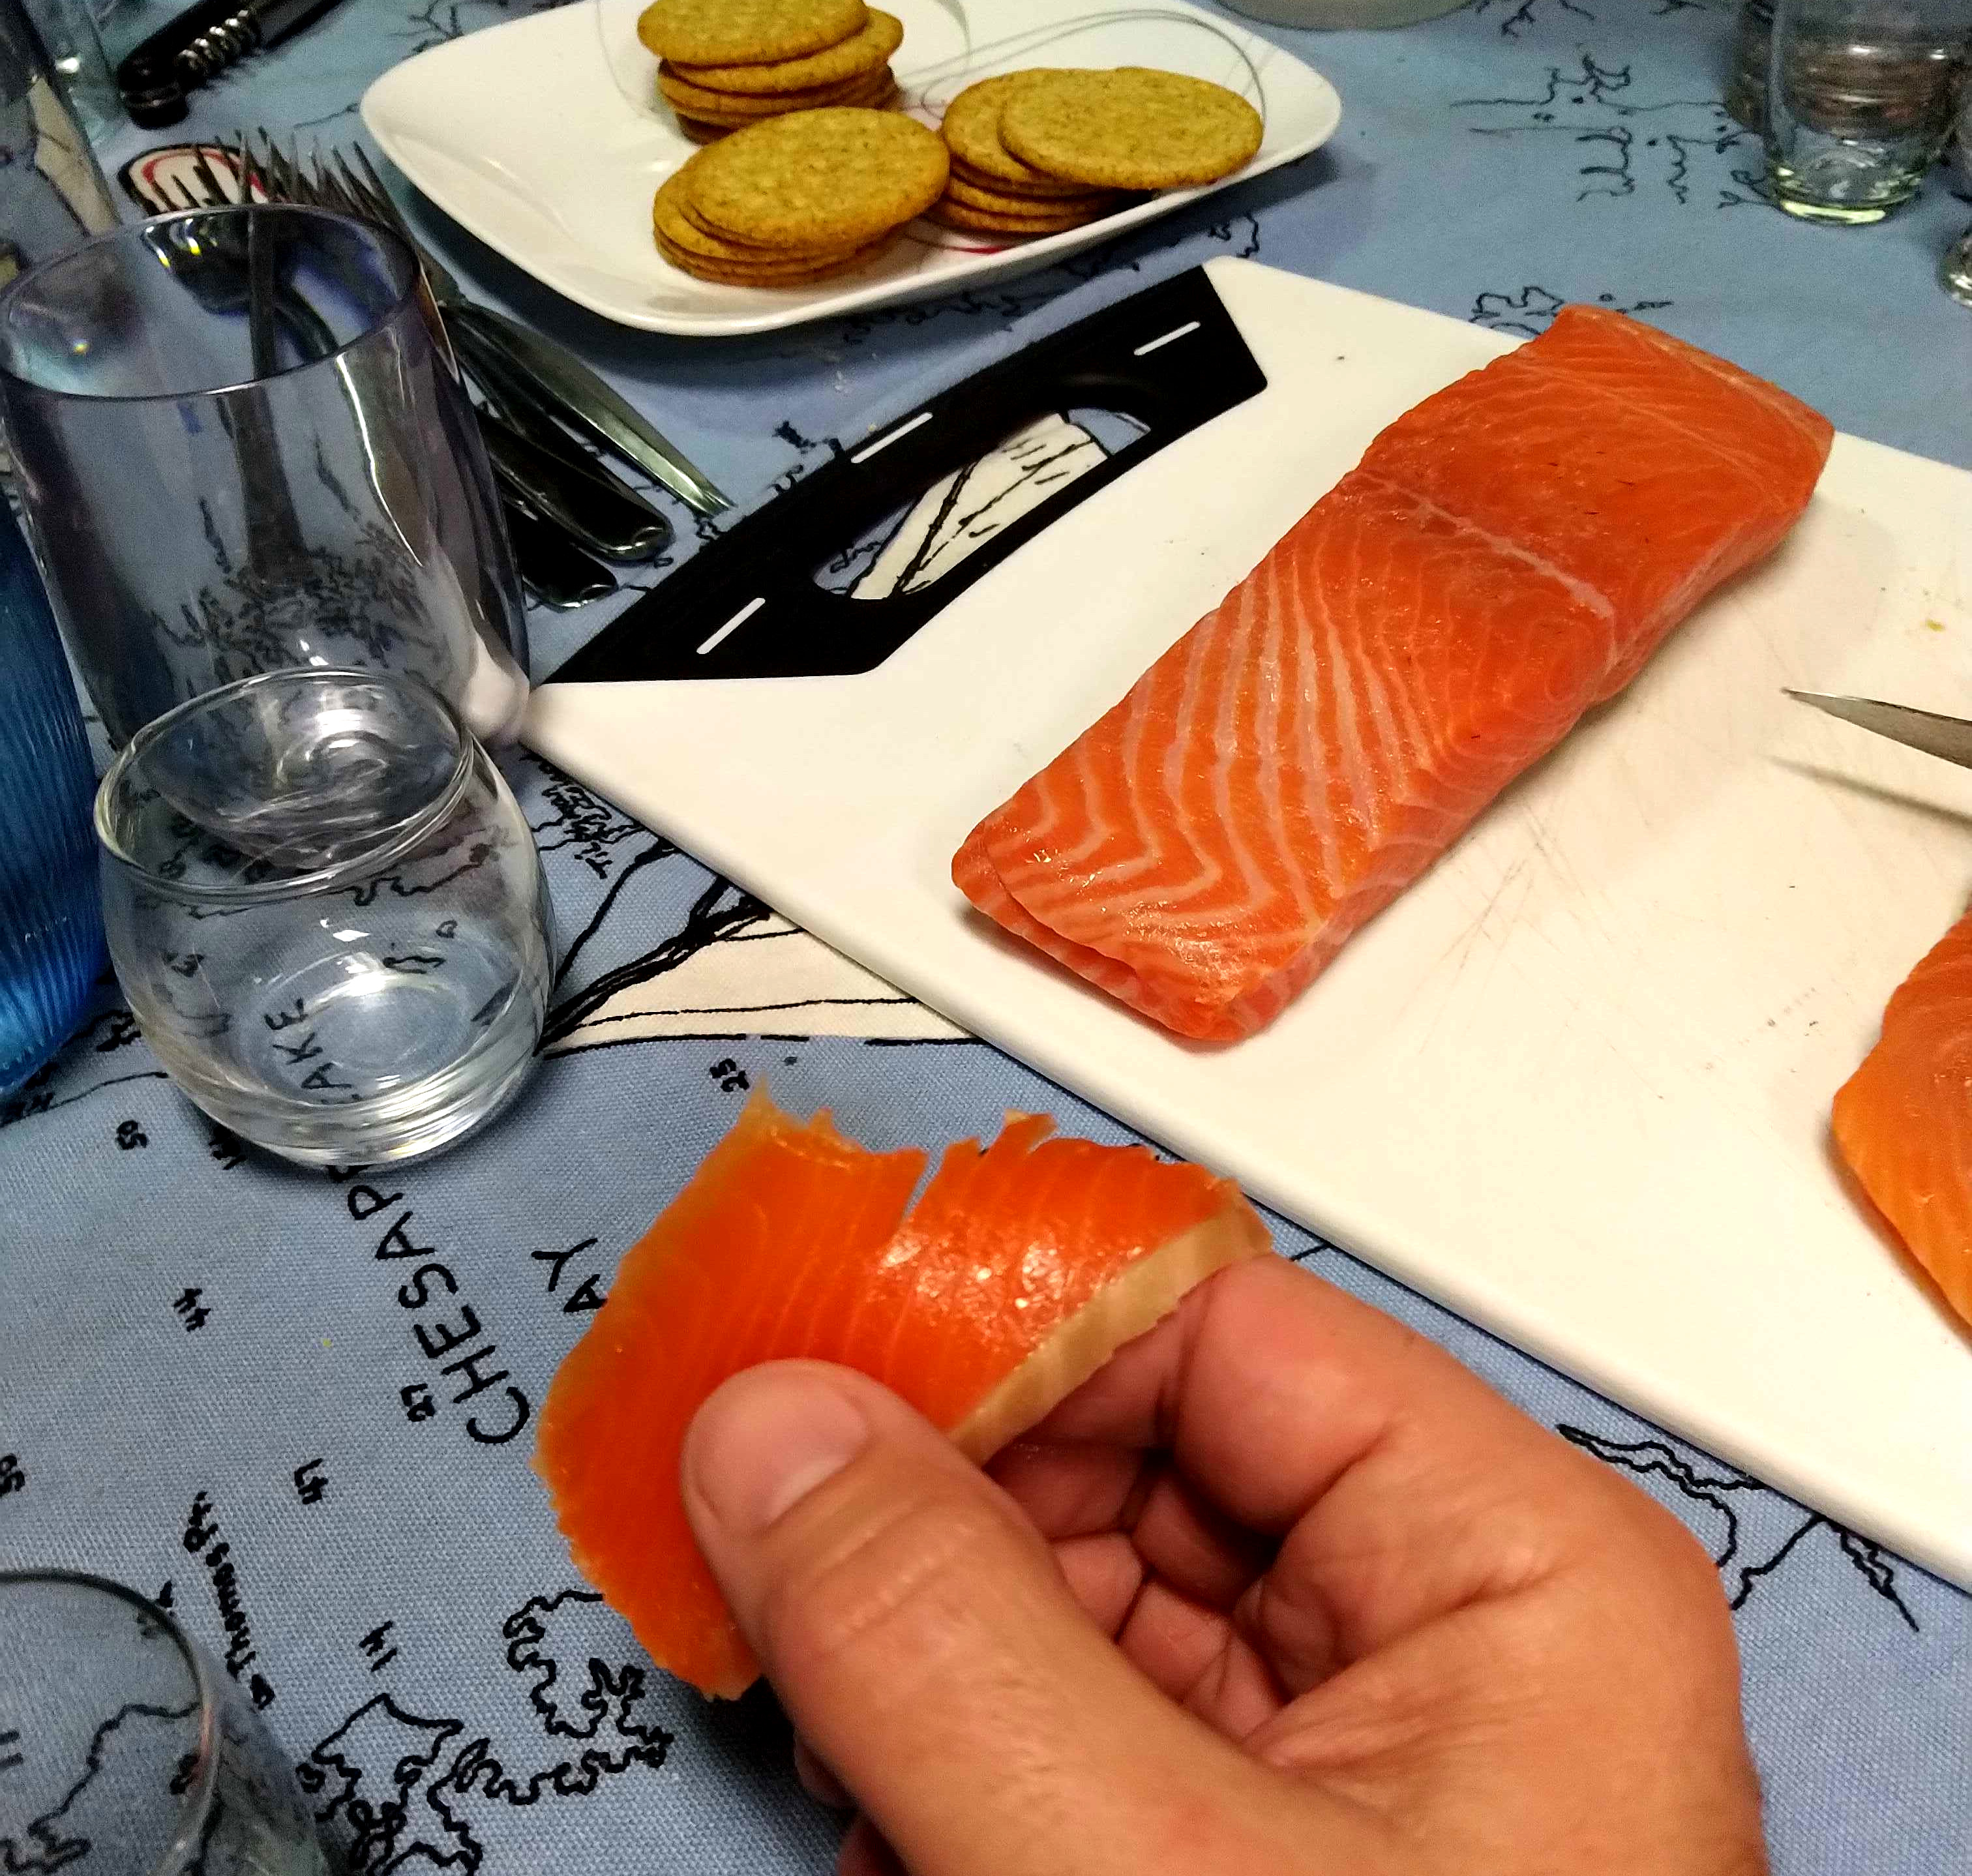 My hand, holding a slice of gravlax salmon which was way too thick.